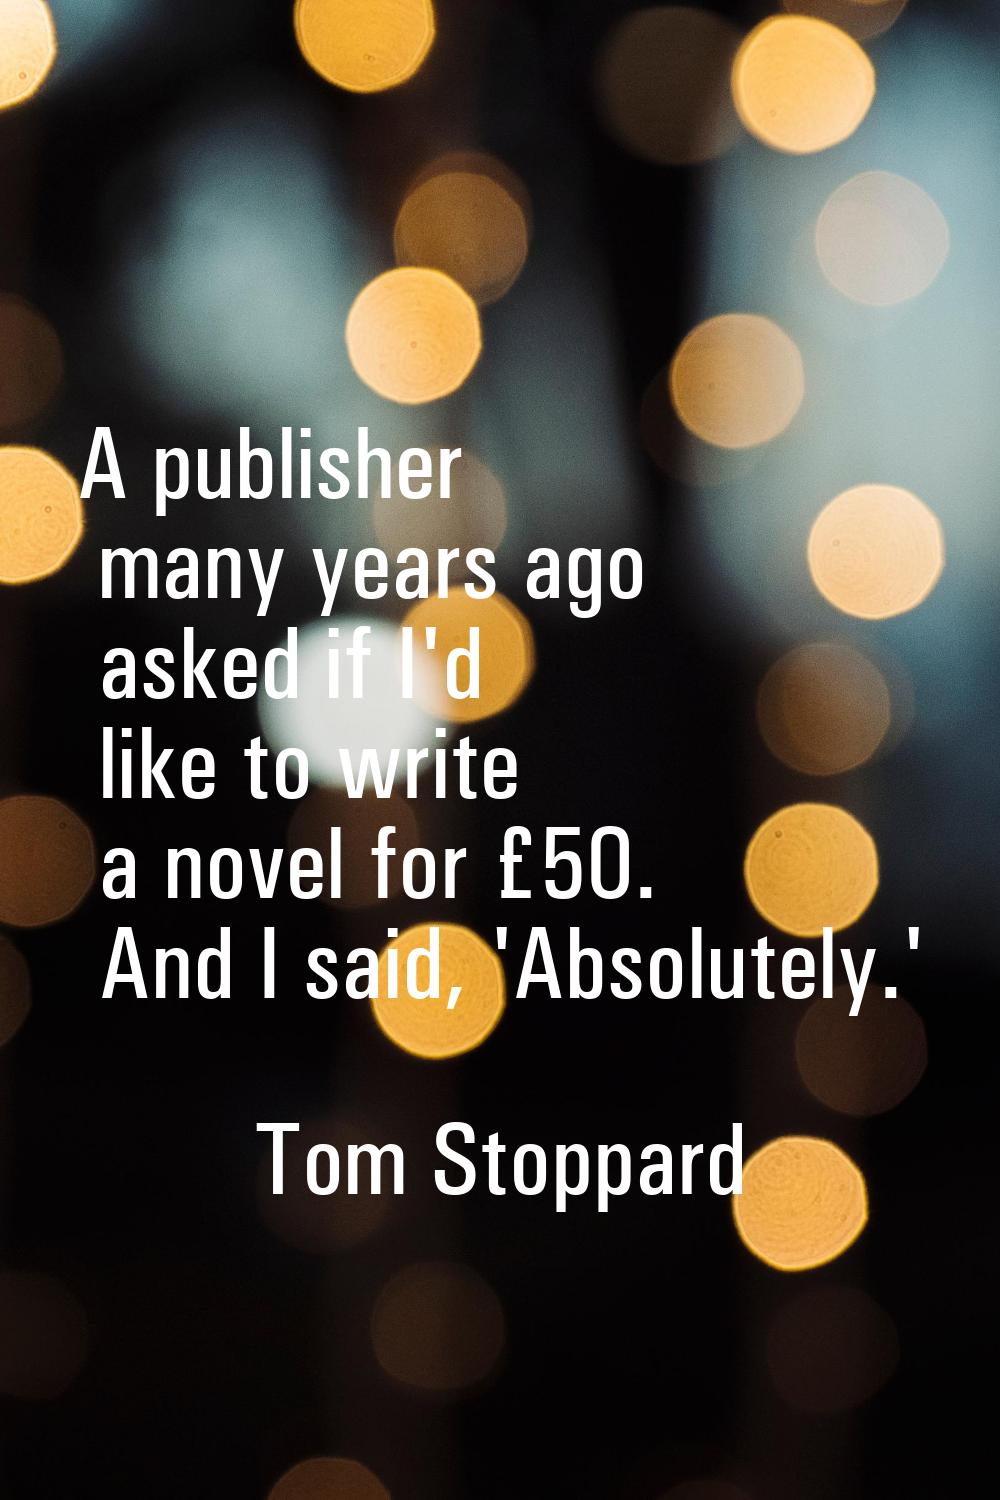 A publisher many years ago asked if I'd like to write a novel for £50. And I said, 'Absolutely.'